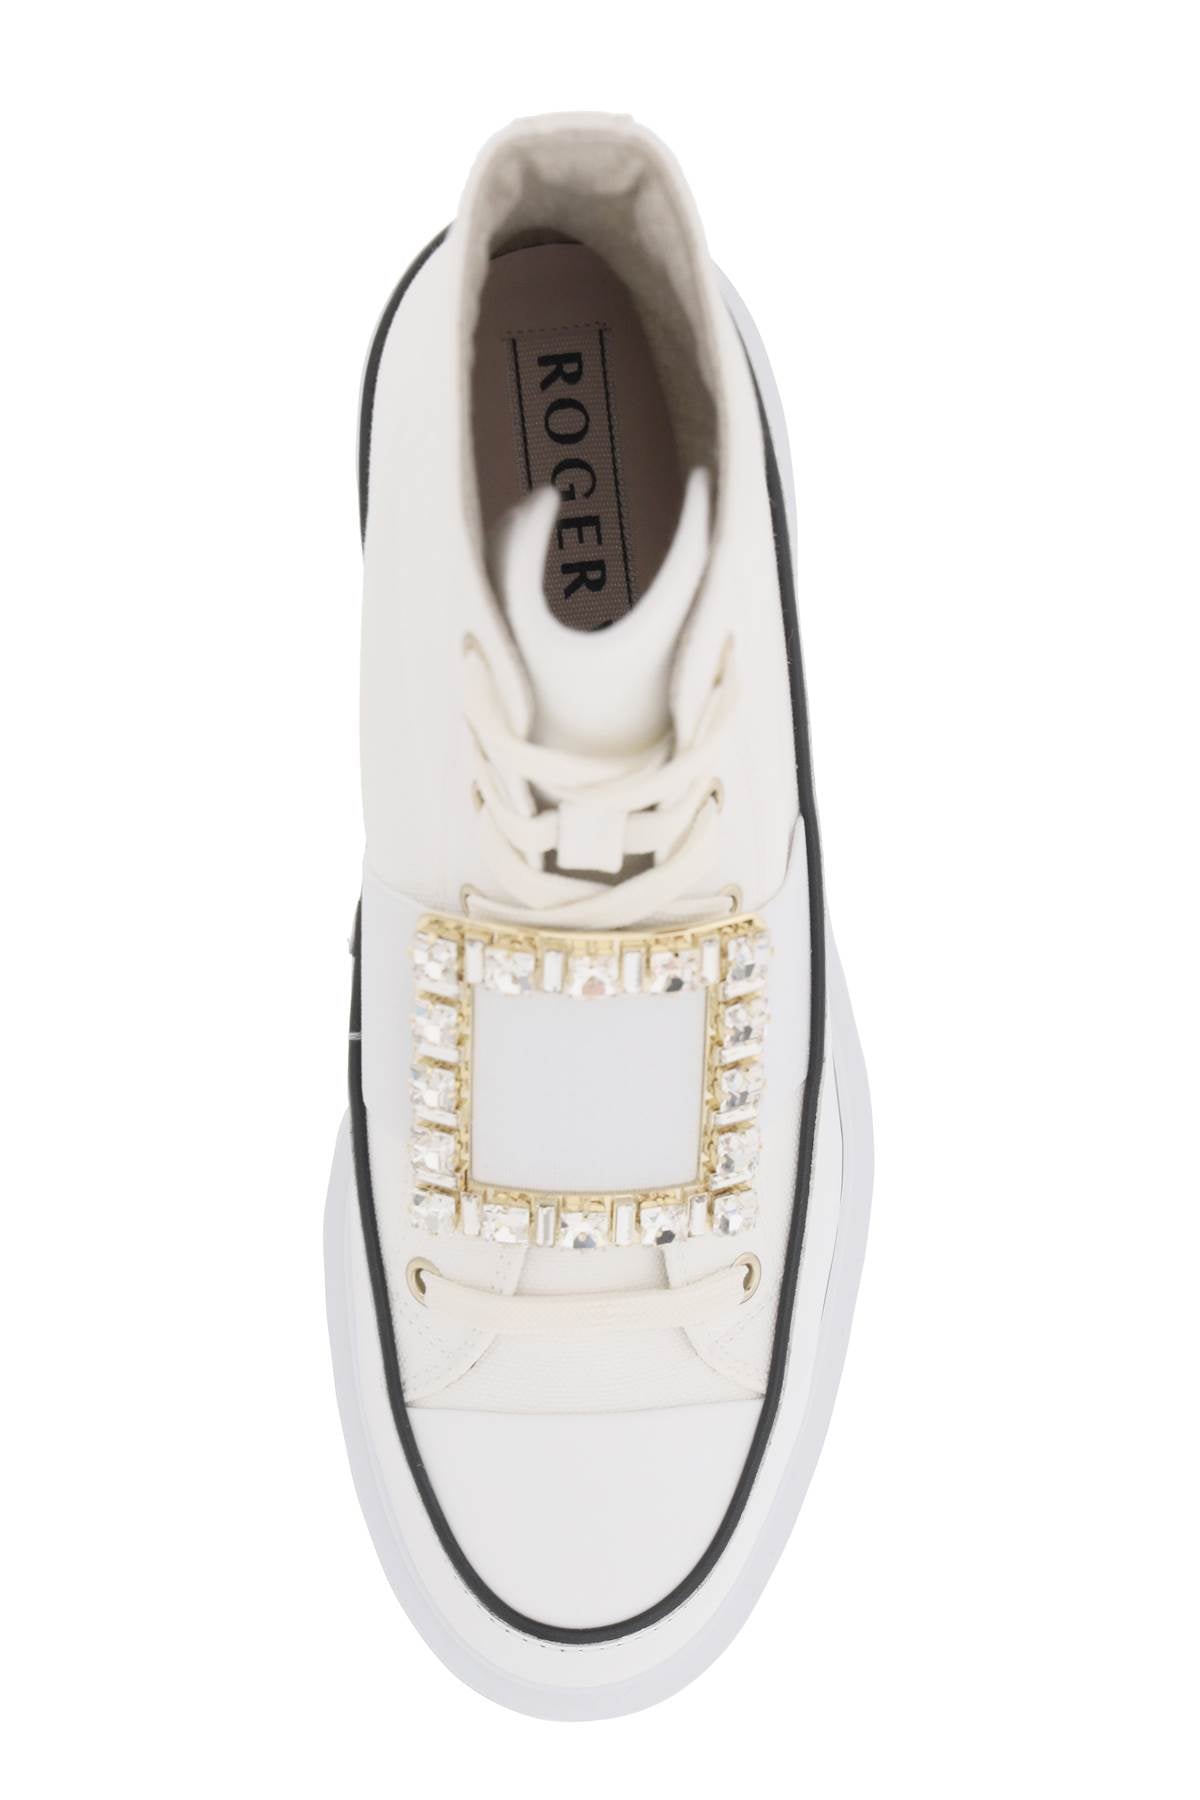 ROGER VIVIER White High-Top Sneakers with Oversized Buckle and Thick Platform Sole